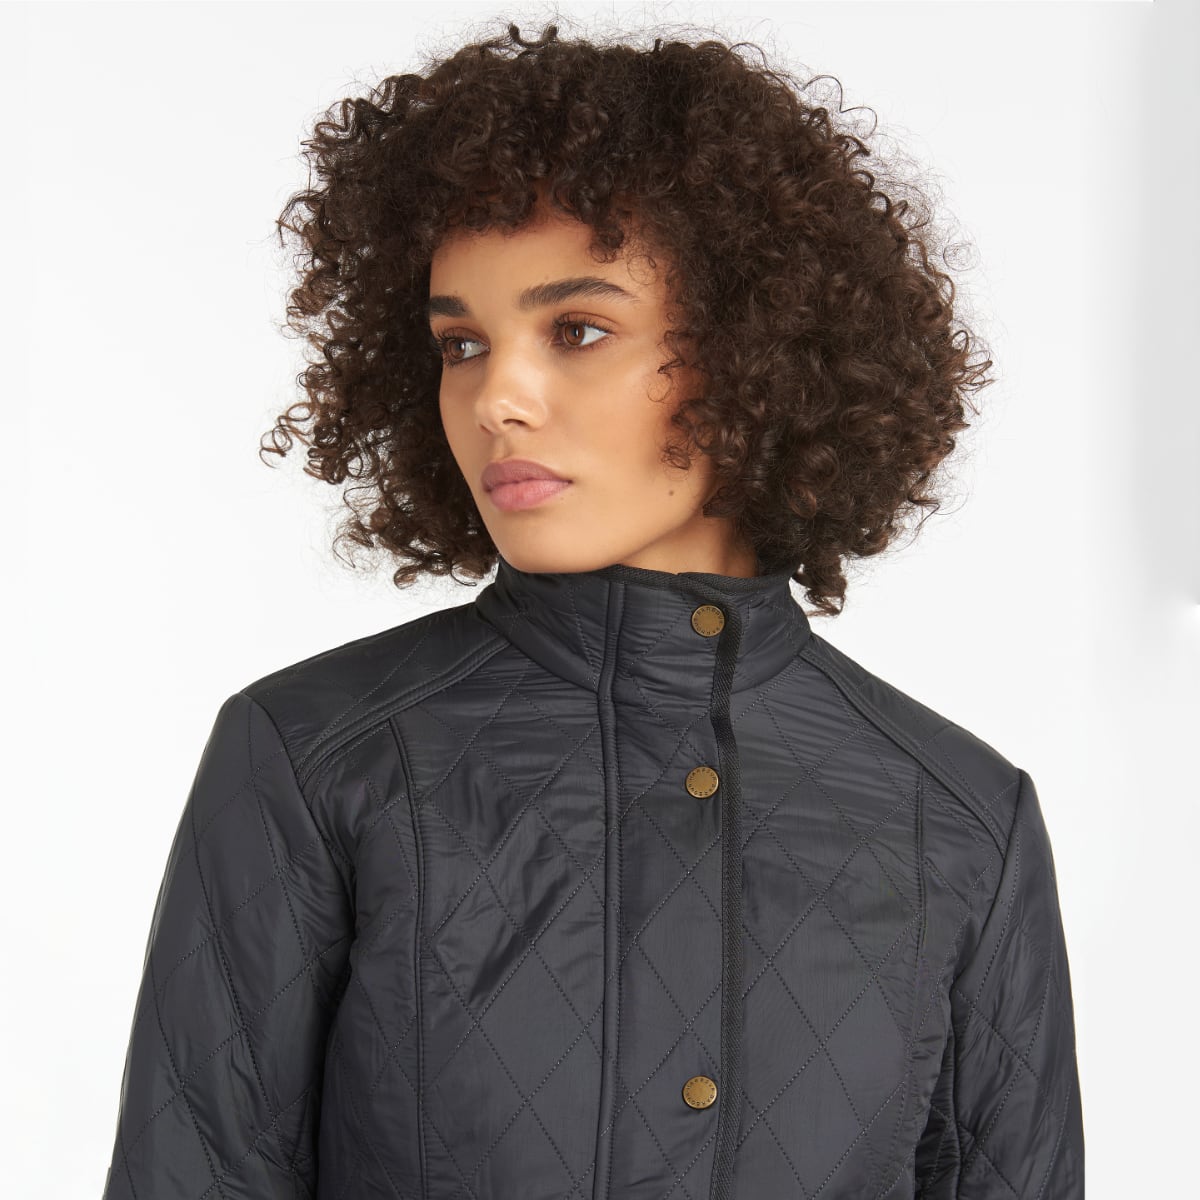 Barbour Cavalry Polarquilt Women's Quilted Jacket | Navy